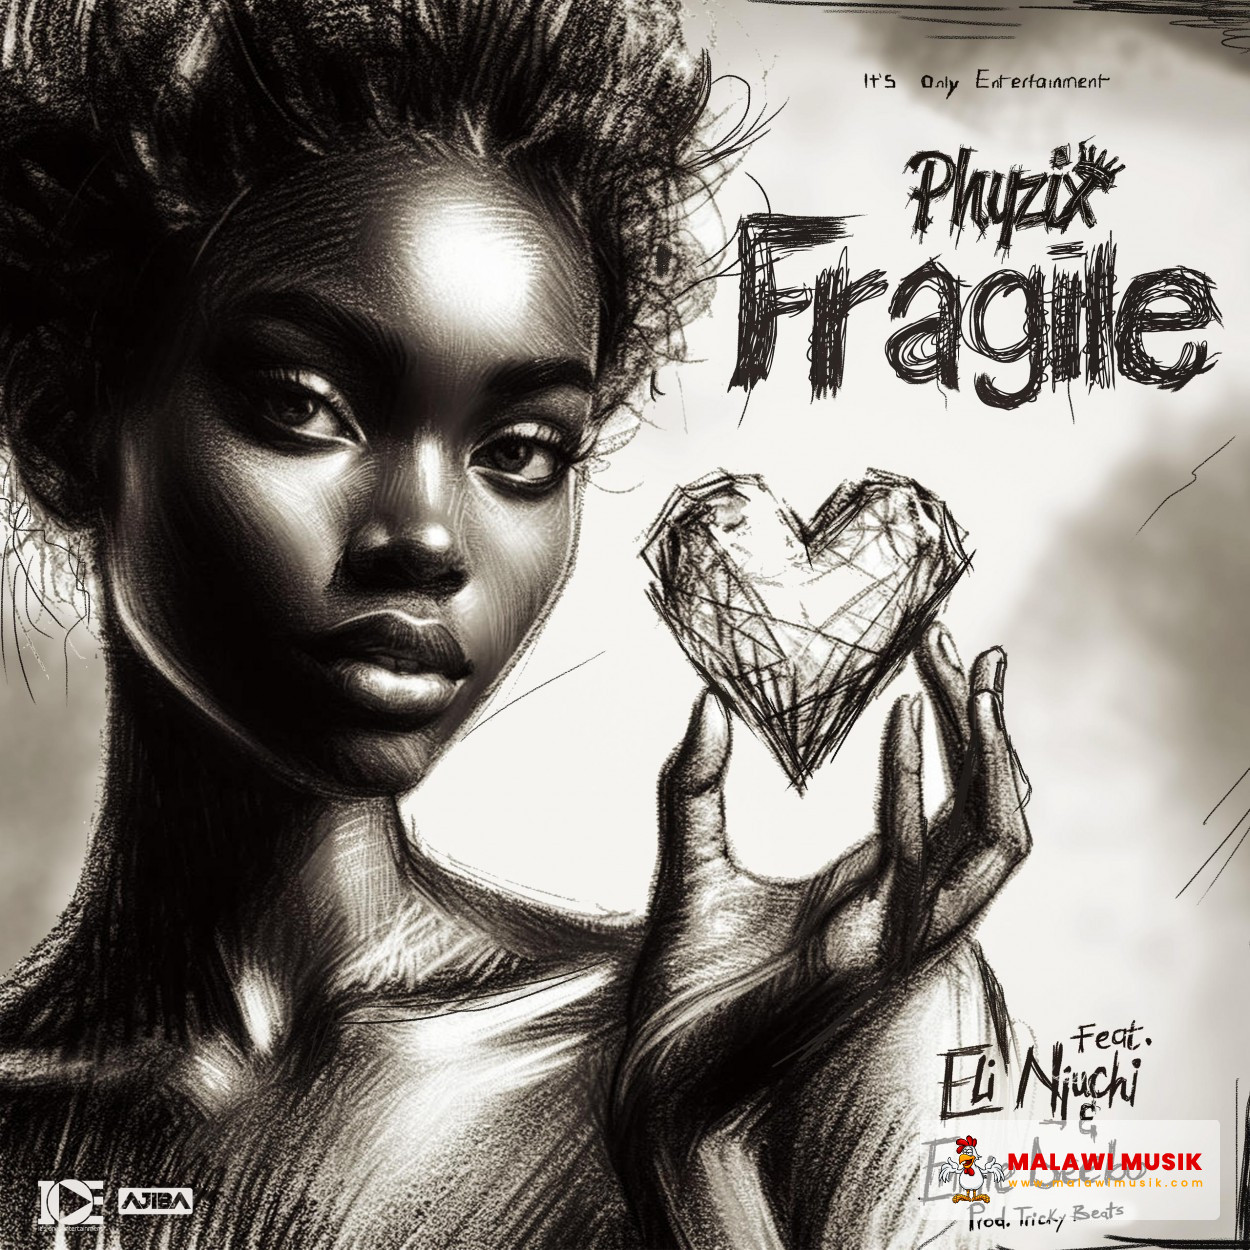 Phyzix-Phyzix - Fragile ft Eli Njuchi and Emmie Deebo-song artwork cover